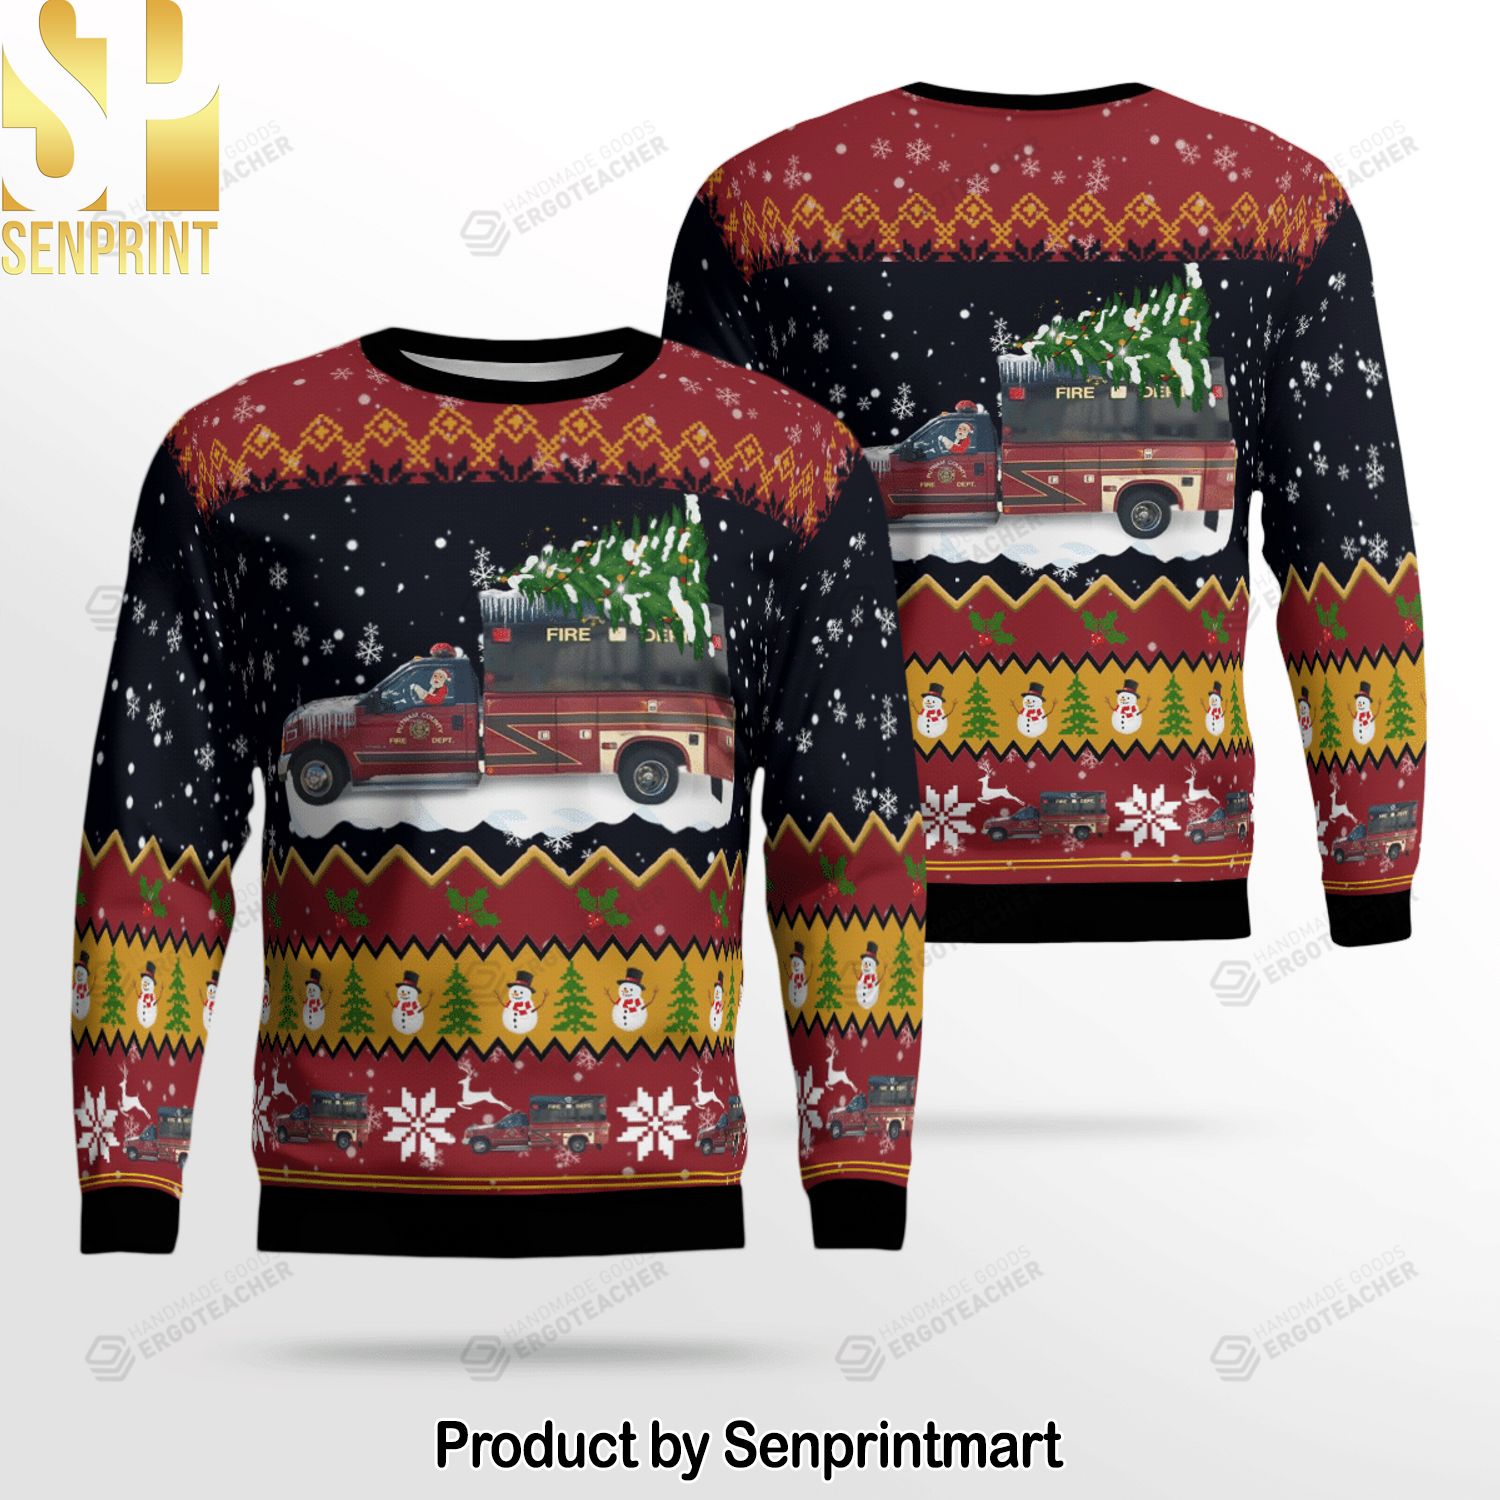 Tennessee Putnam County Fire Department For Christmas Gifts Knitting Pattern Sweater